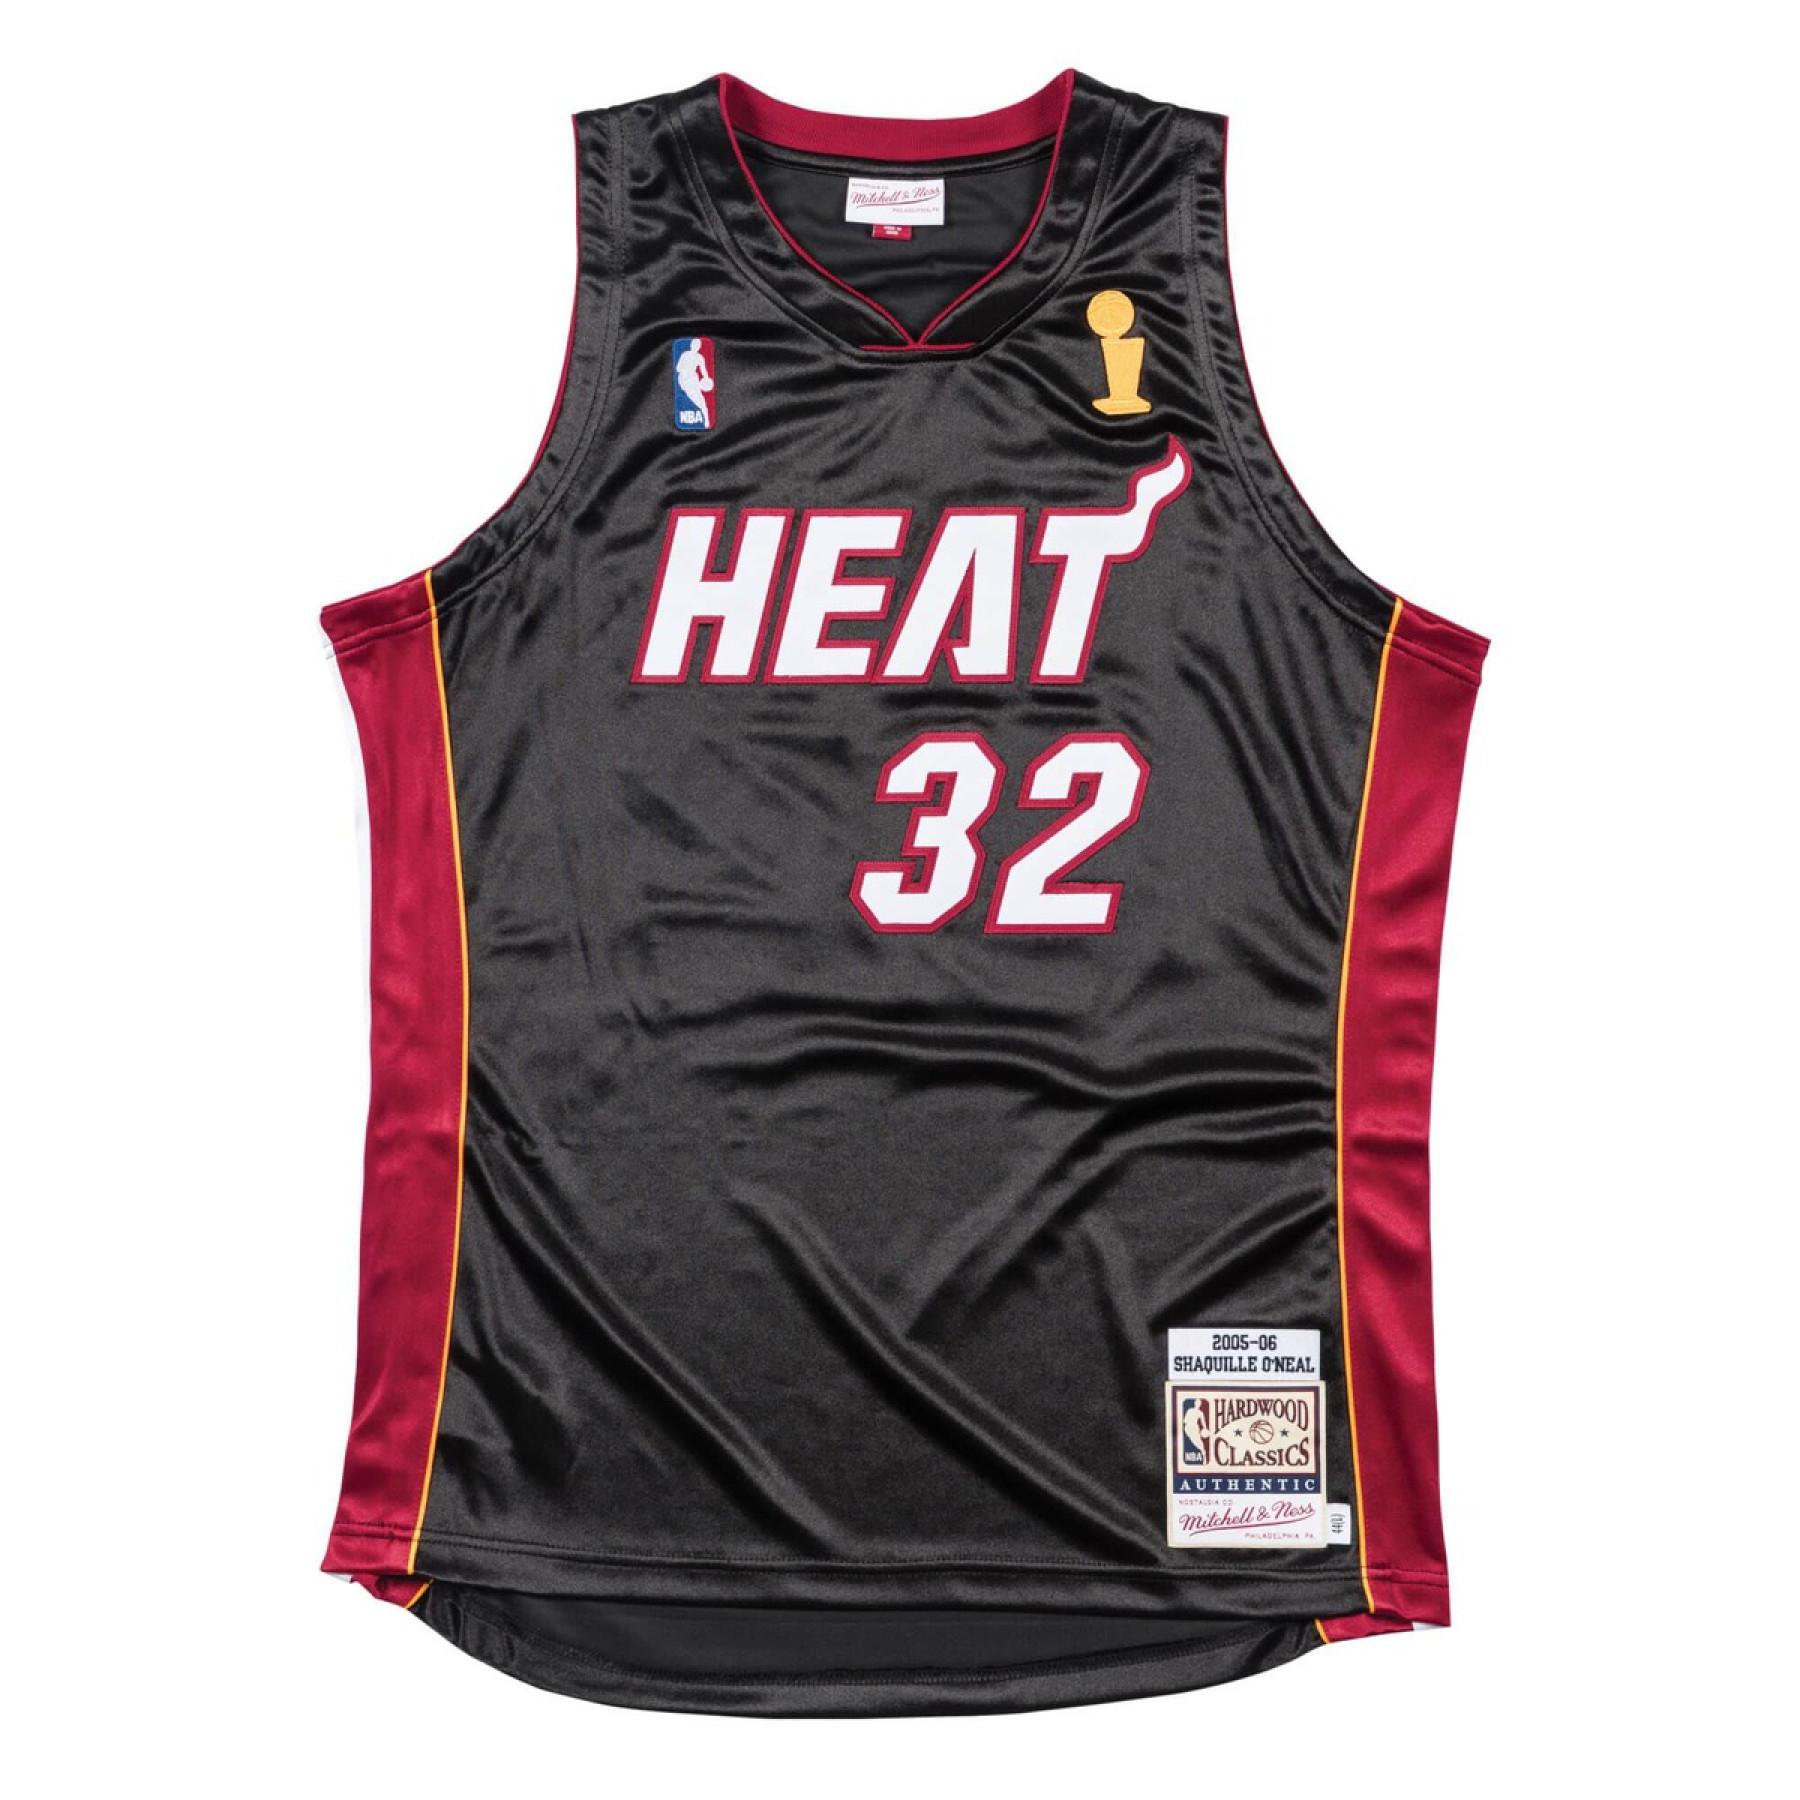 Maillot Authentique Miami Heats Shaquille Oneal 200506 Mitchell